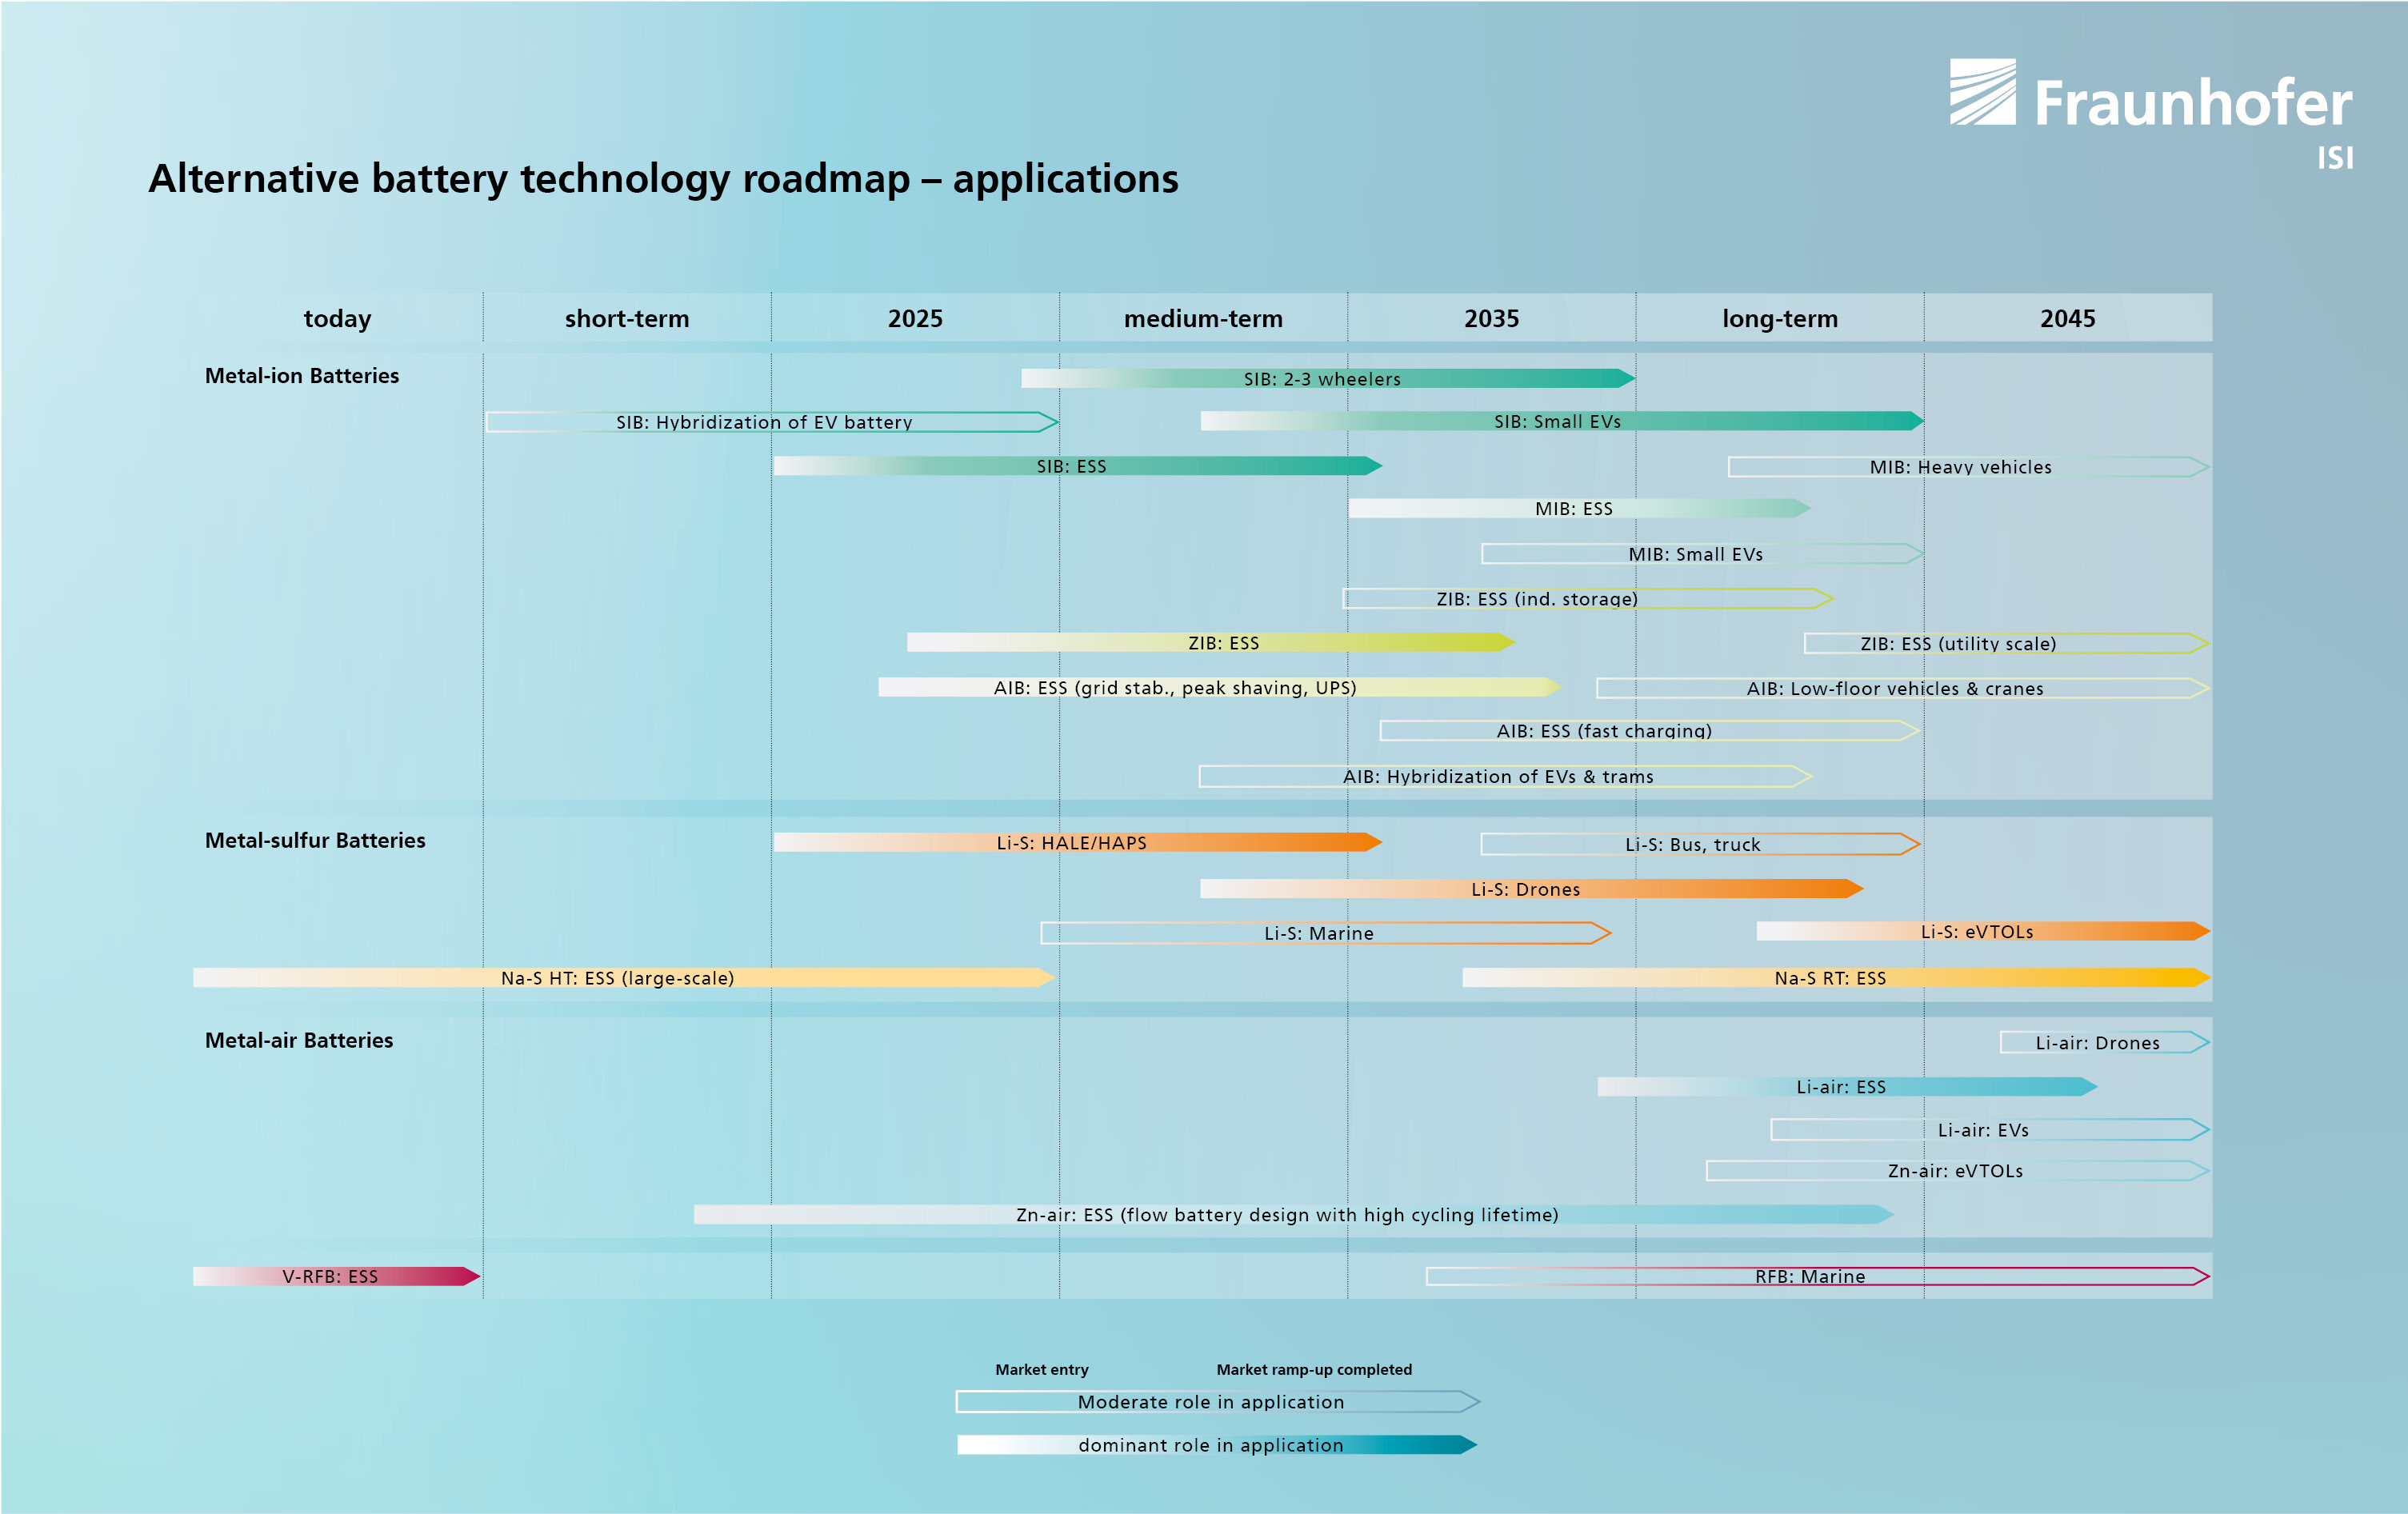 Roadmap of alternative battery technologies with a chronological localisation of the market ramp-up in individual applications